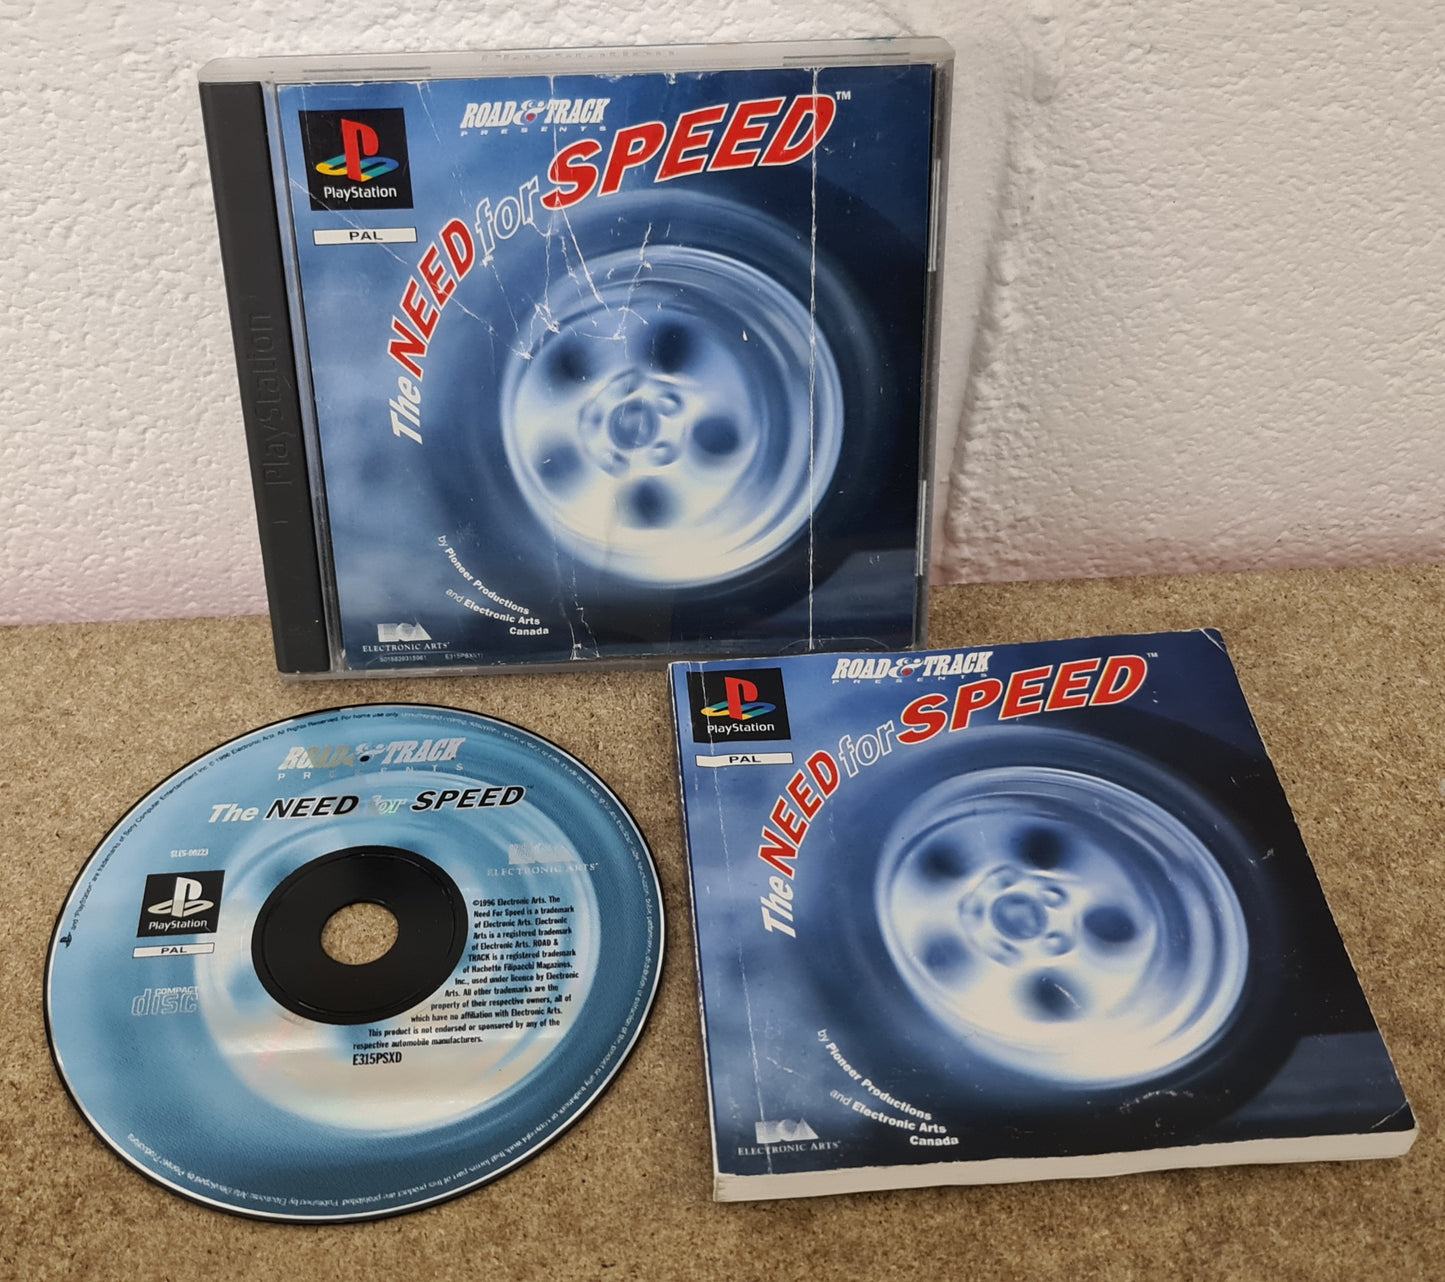 Road & Track Presents the Need for Speed Sony Playstation 1 (PS1) RARE Game